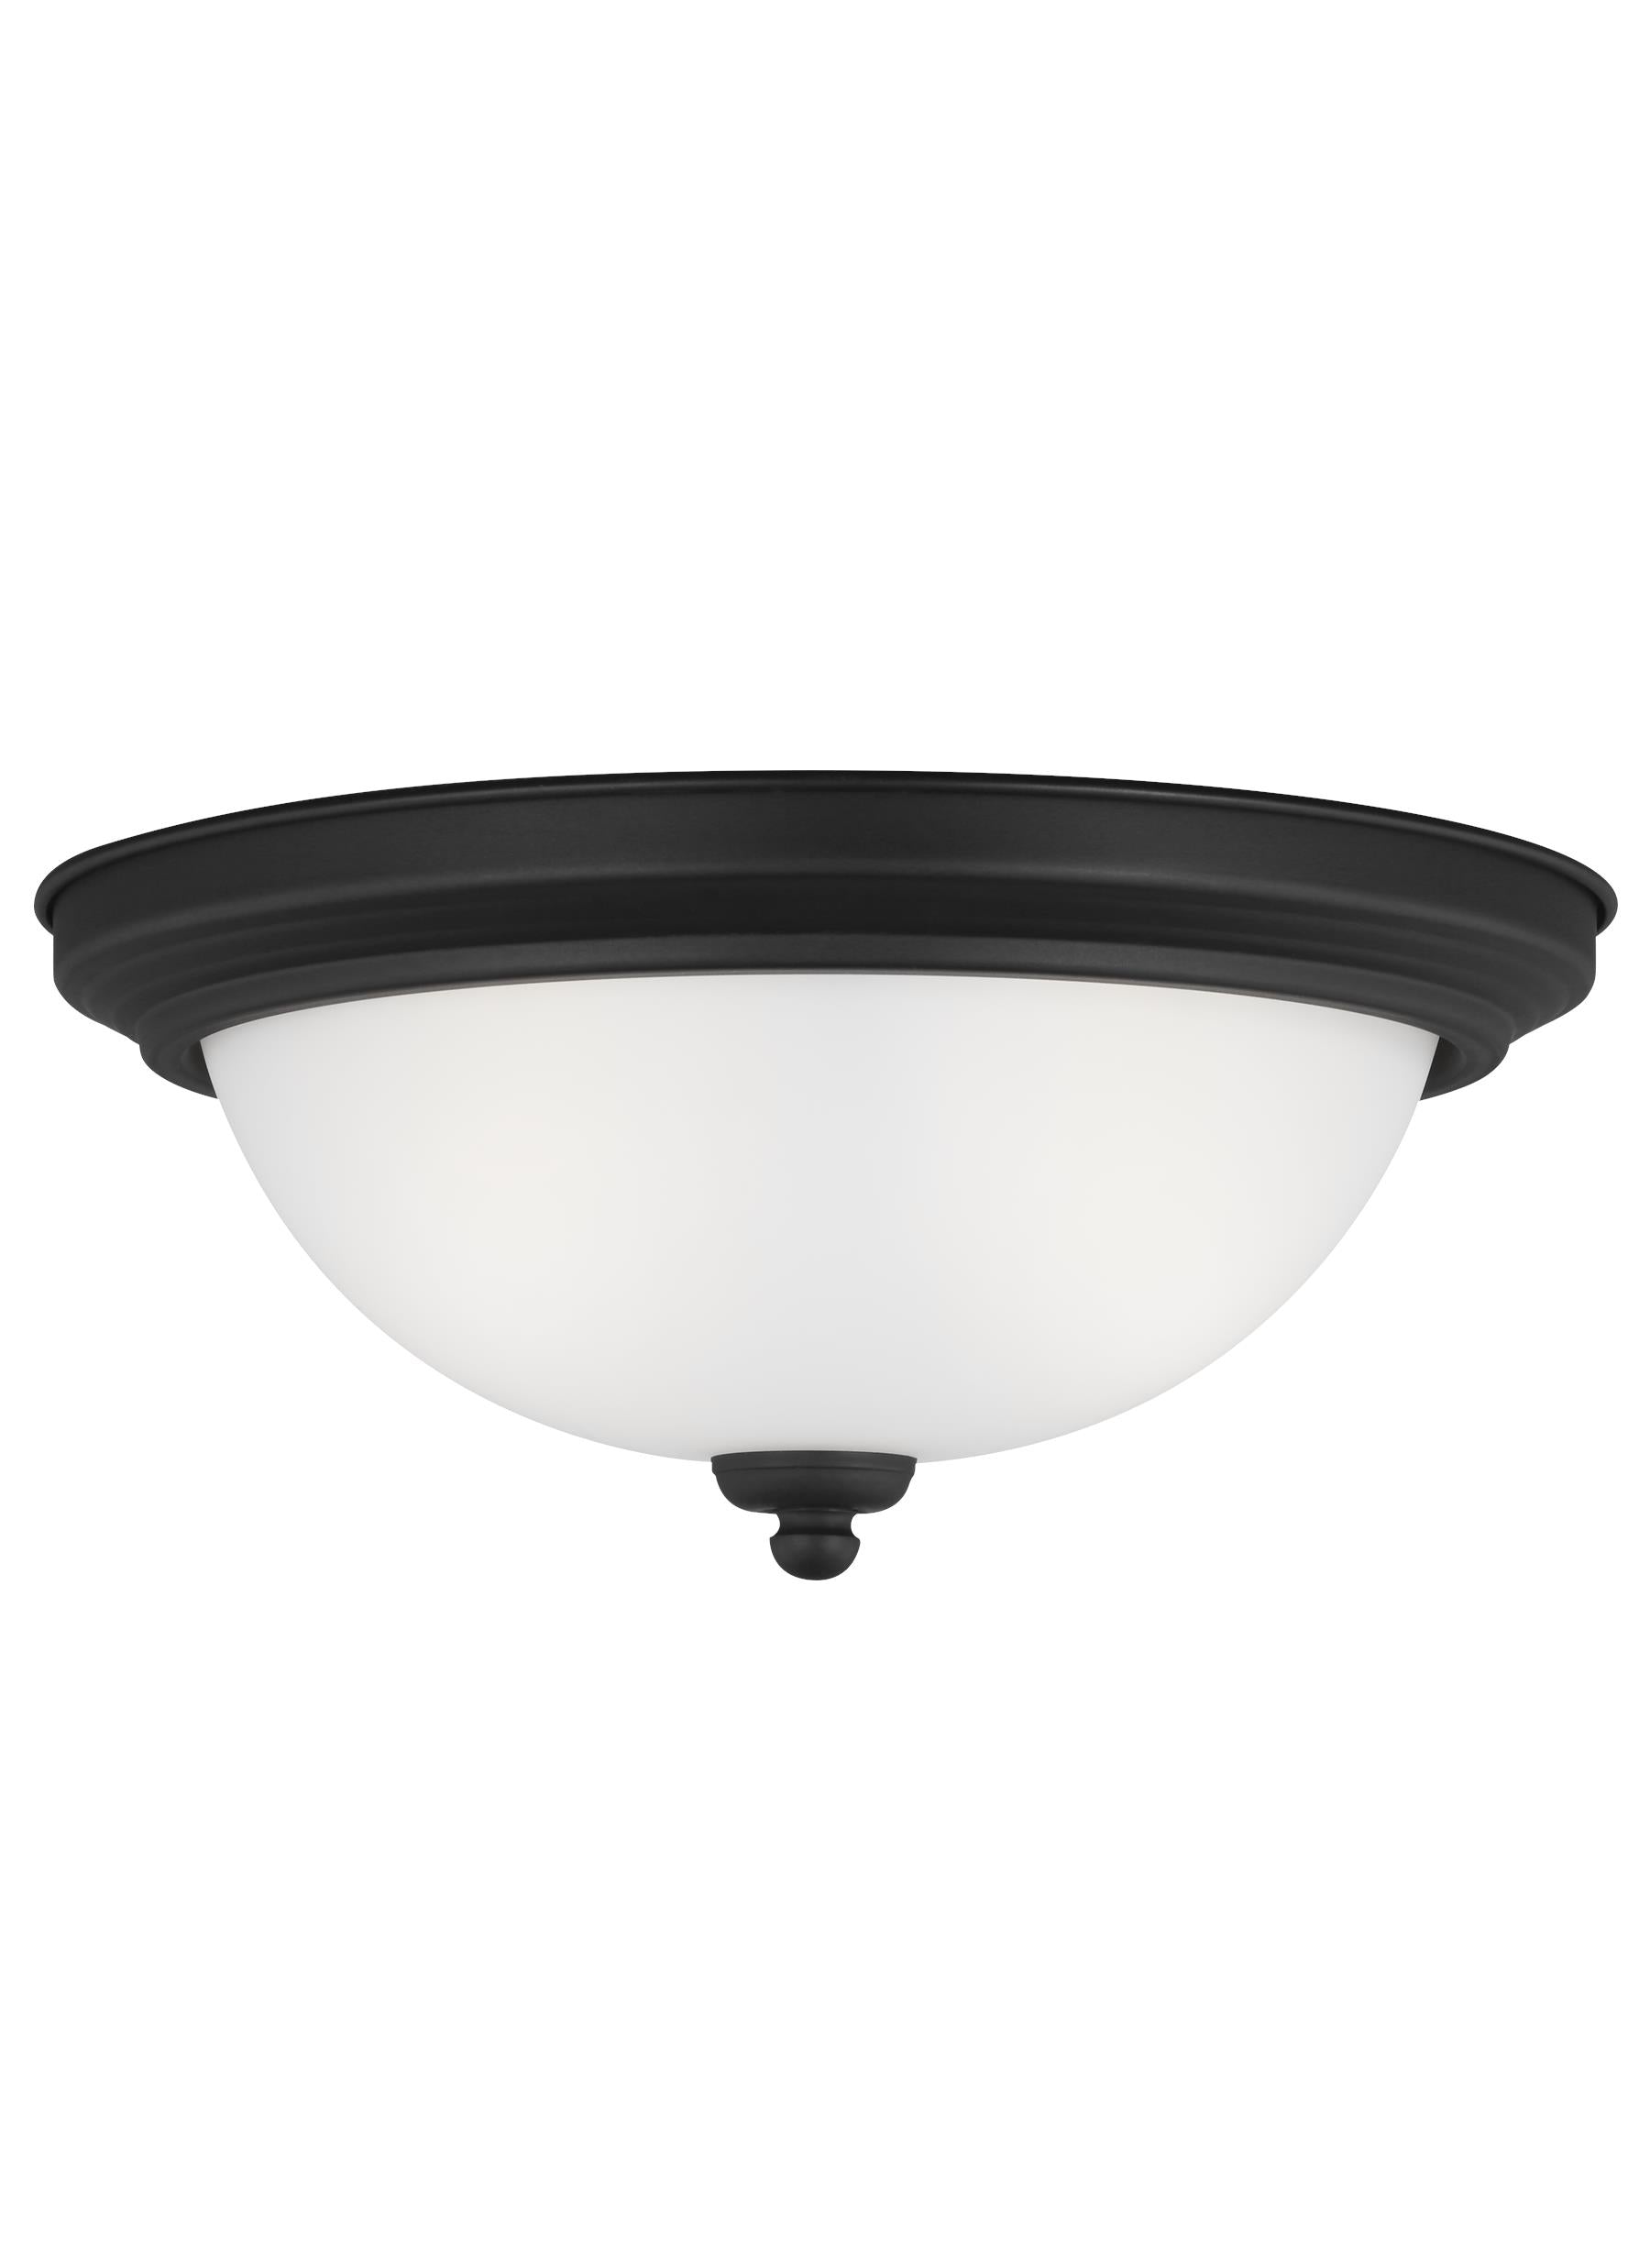 Geary transitional 2-light indoor dimmable ceiling flush mount fixture in midnight black finish with satin etched glass di...